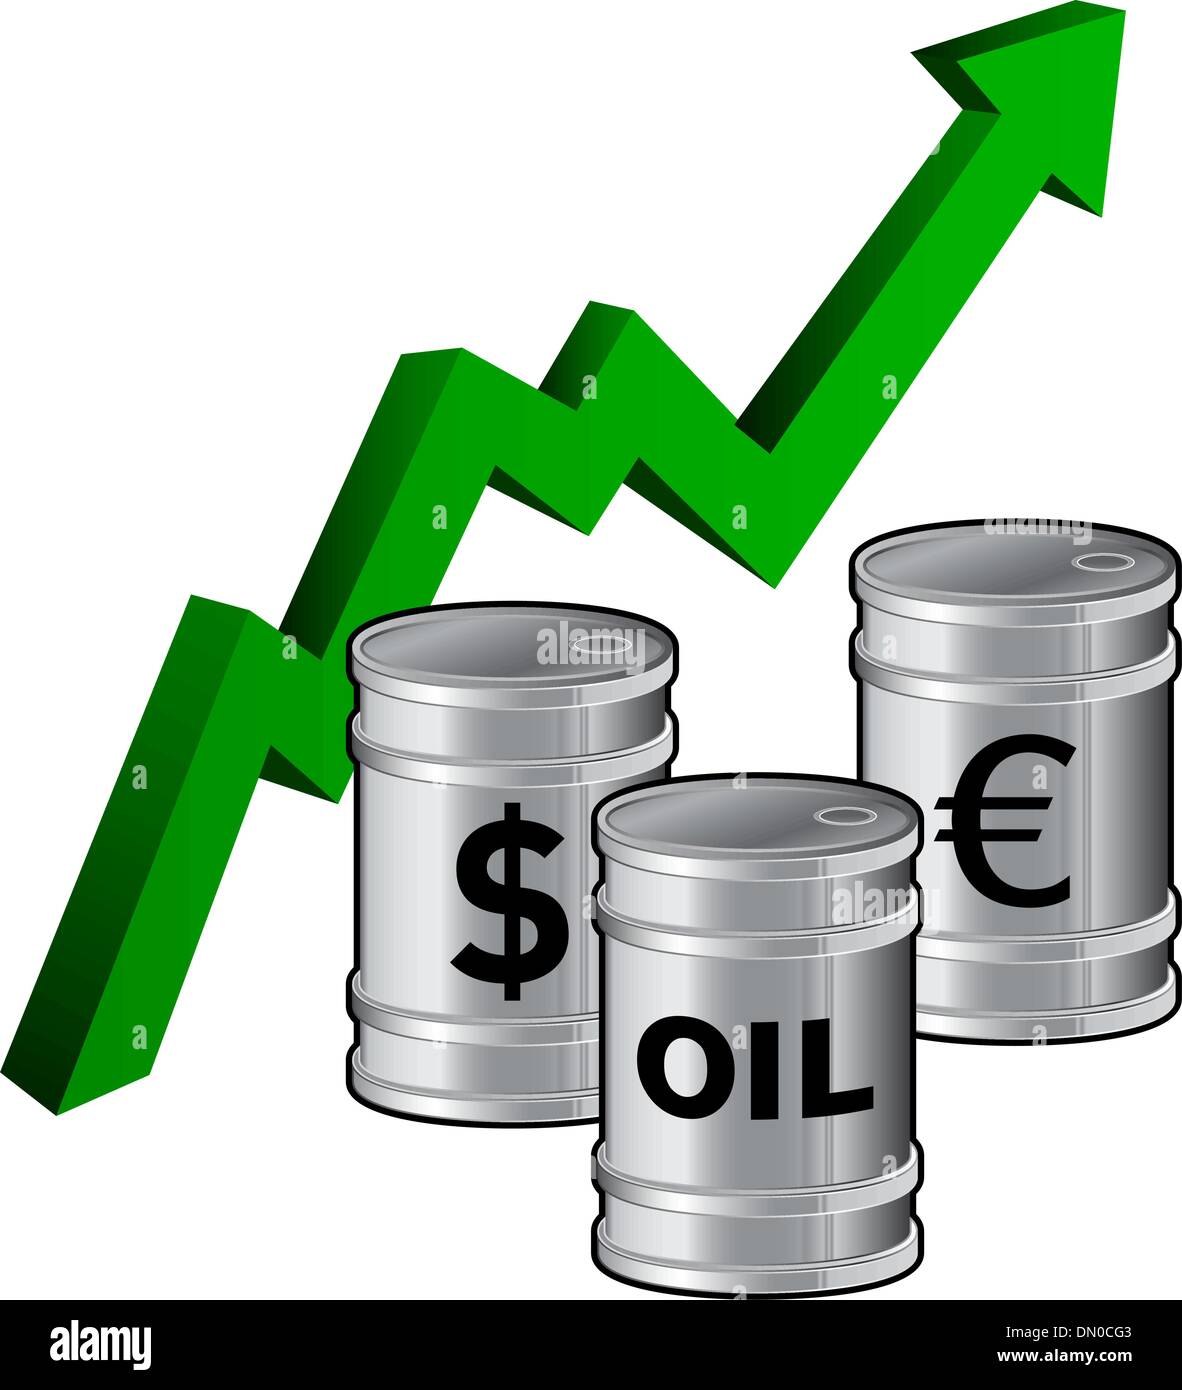 Oil prices rising vector Stock Vector